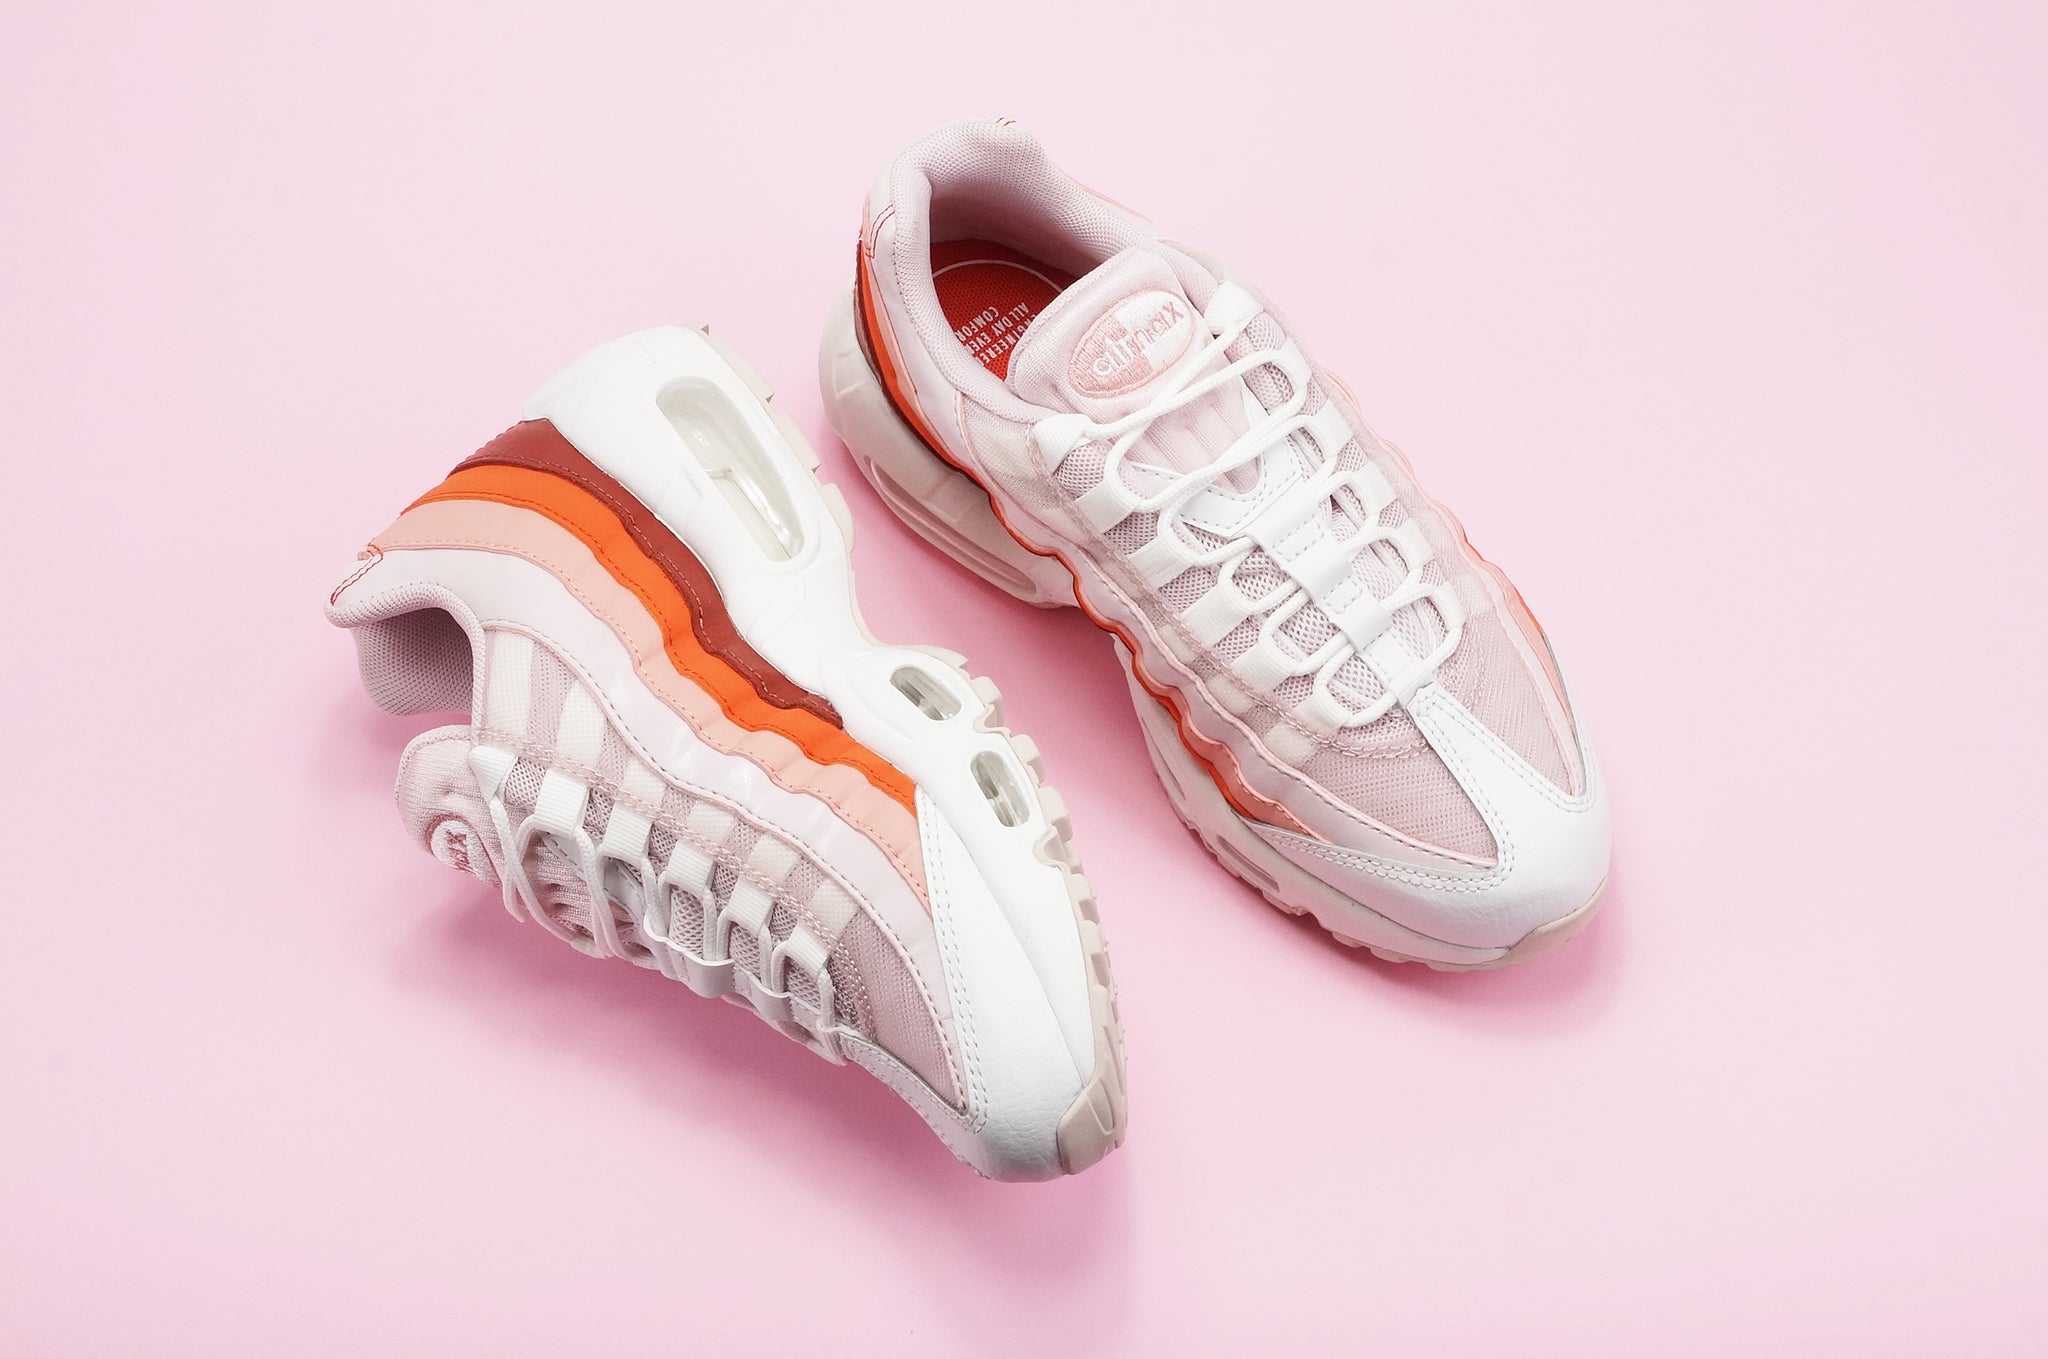 SNEAKER RELEASES | Nike Air Max 95 Barely Rose/Coral Stardust | May 1